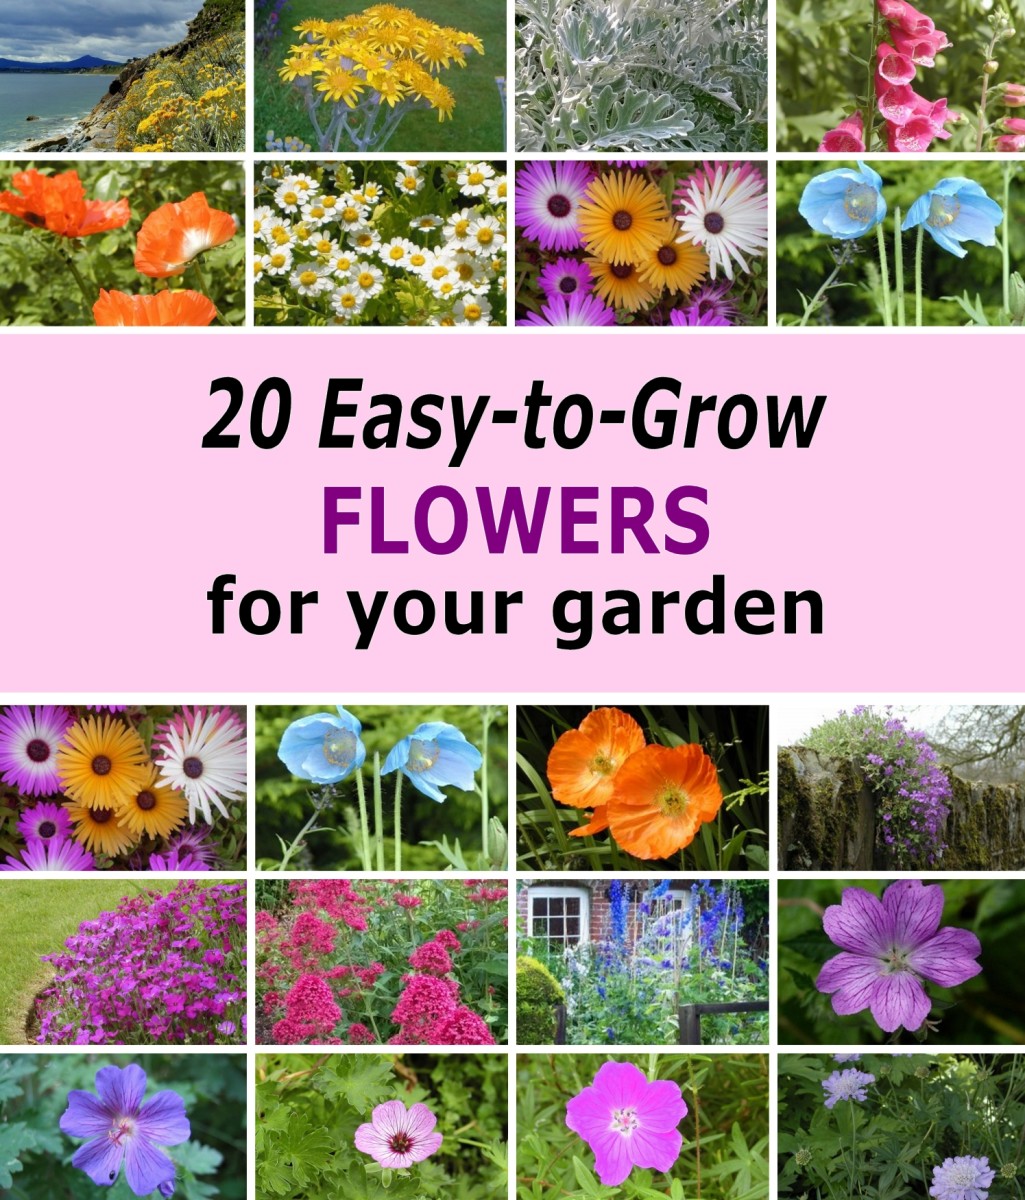 20 Flowers With Names, You've Seen in Other People's Gardens! | Dengarden